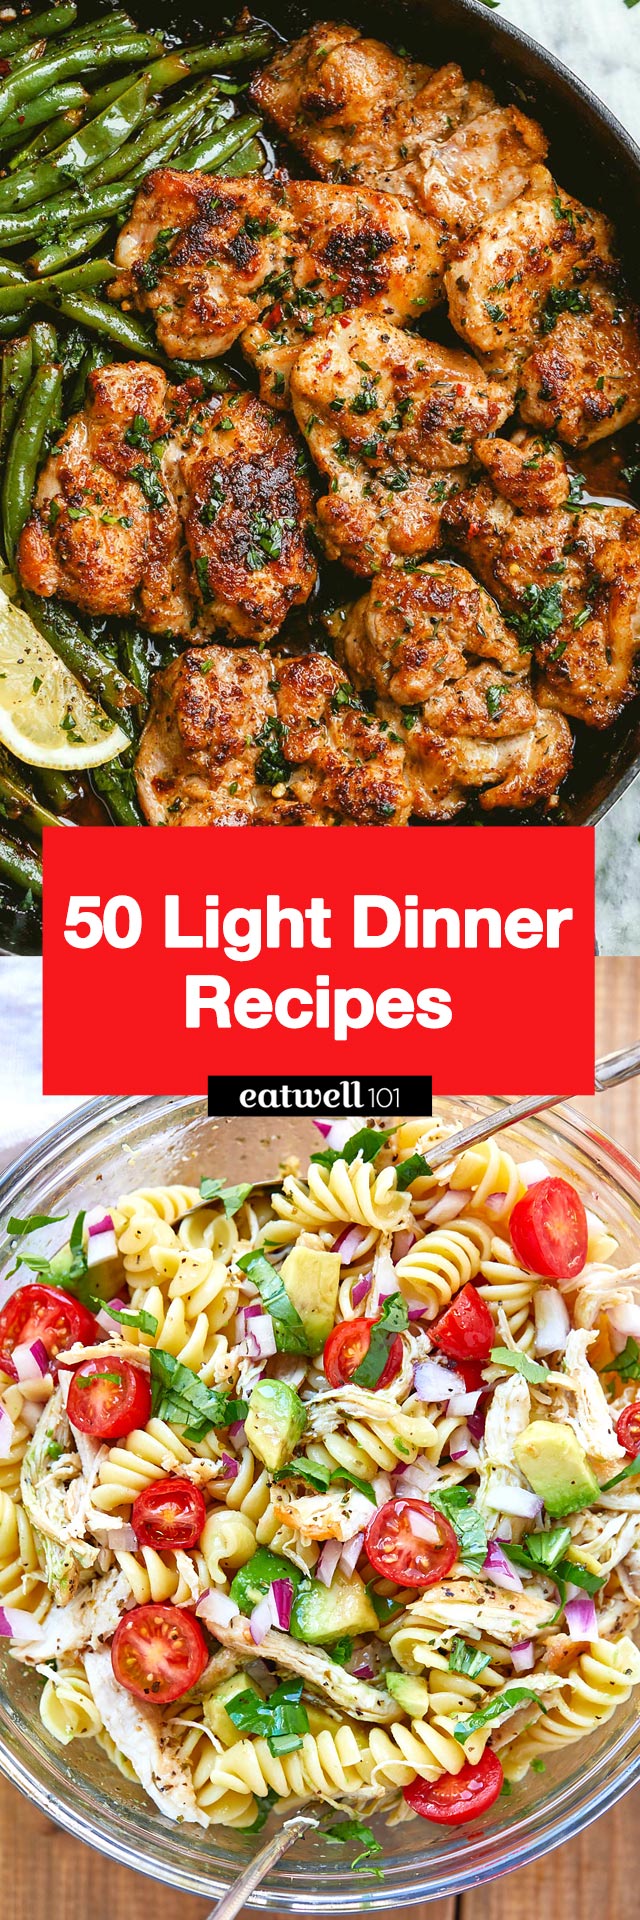 Light Dinner Ideas: Delicious and Nutritious Meals for a Healthy Night